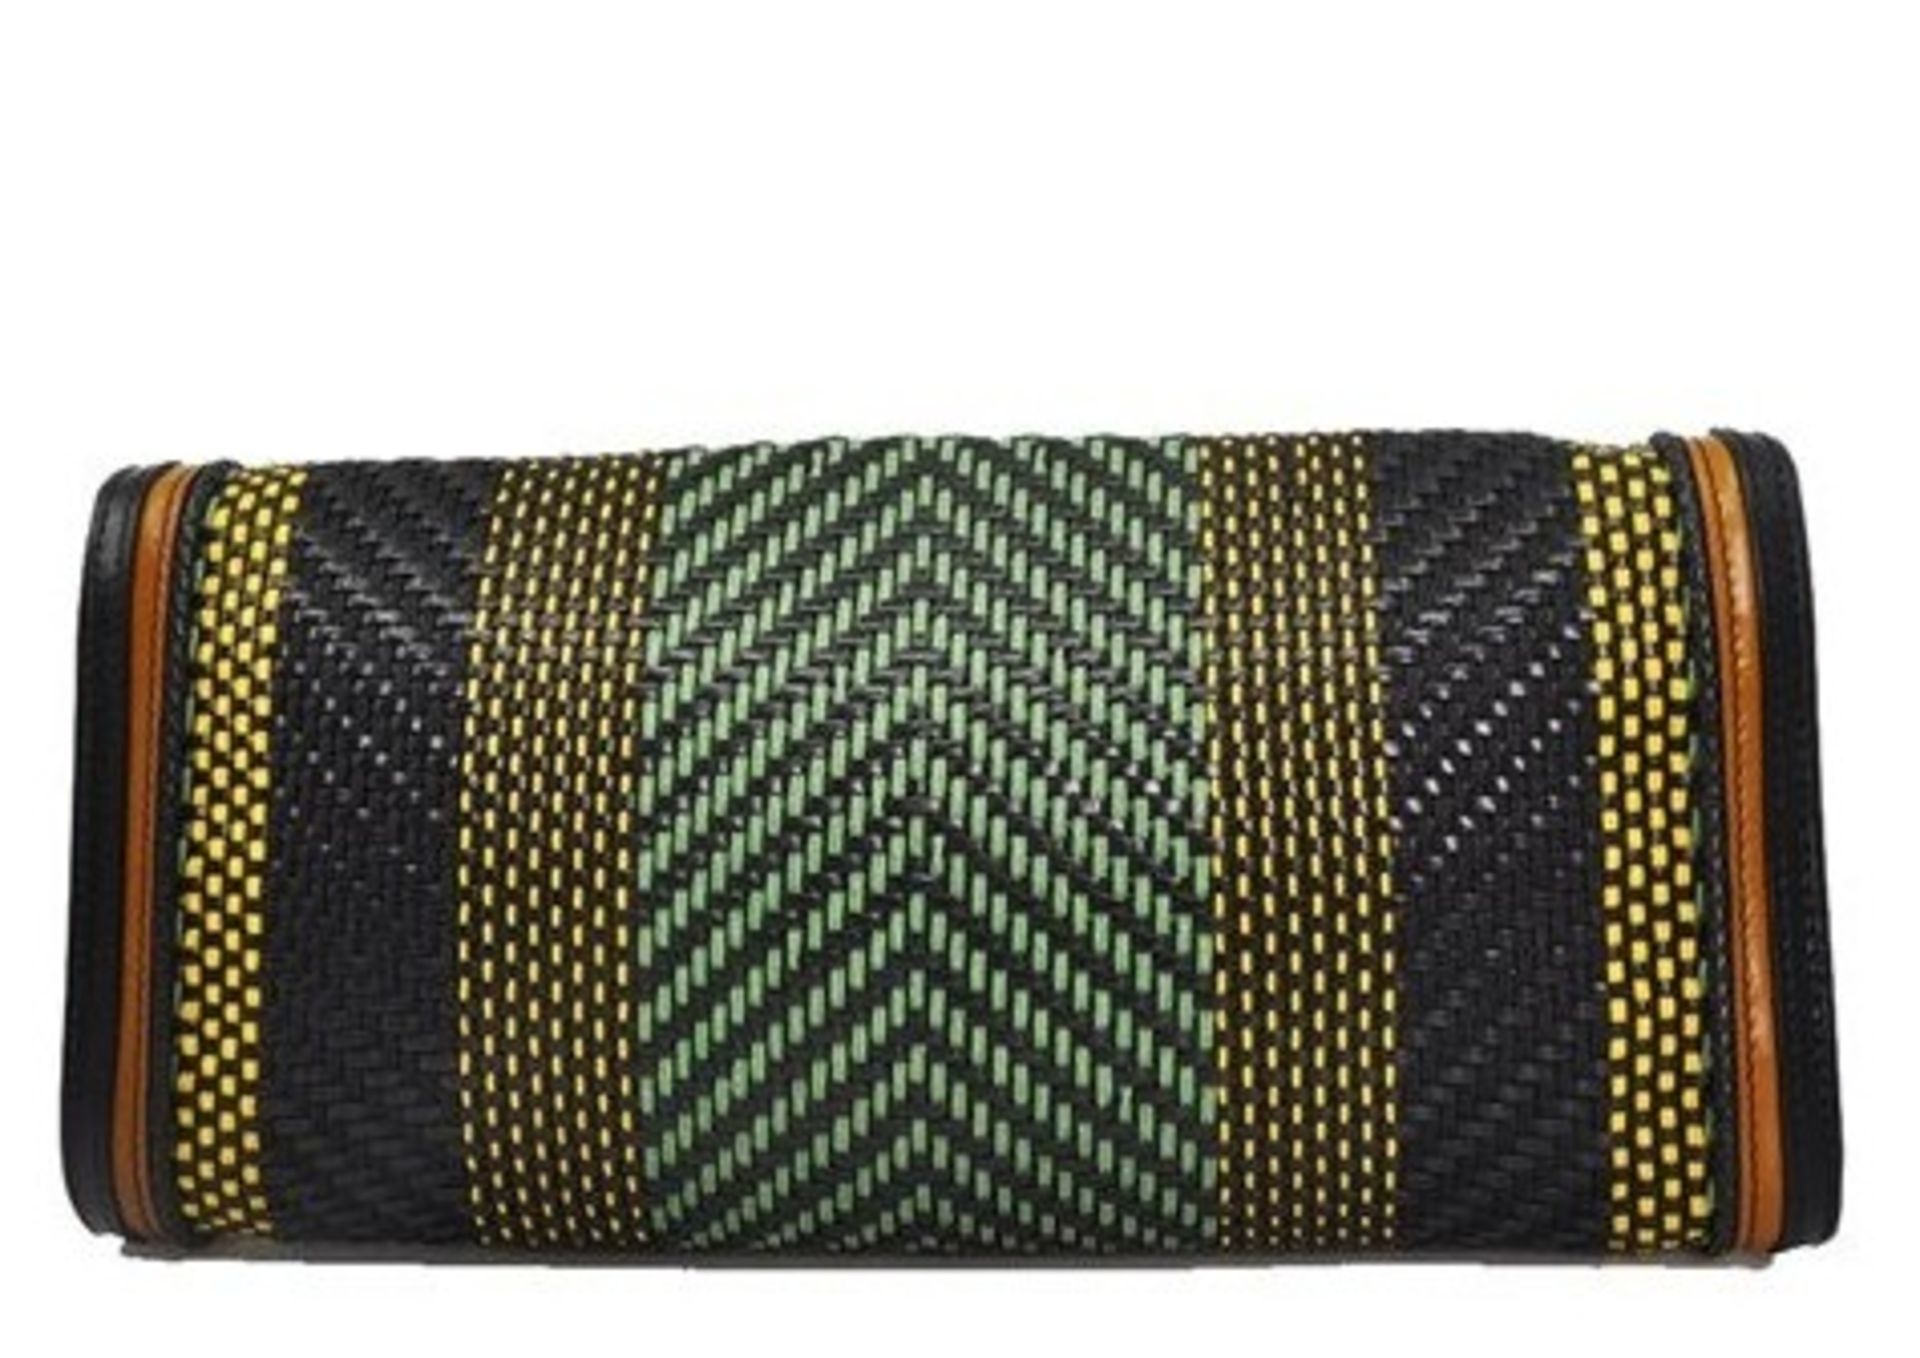 Burberry Wicker Knitting Leather Clutch - Image 8 of 8